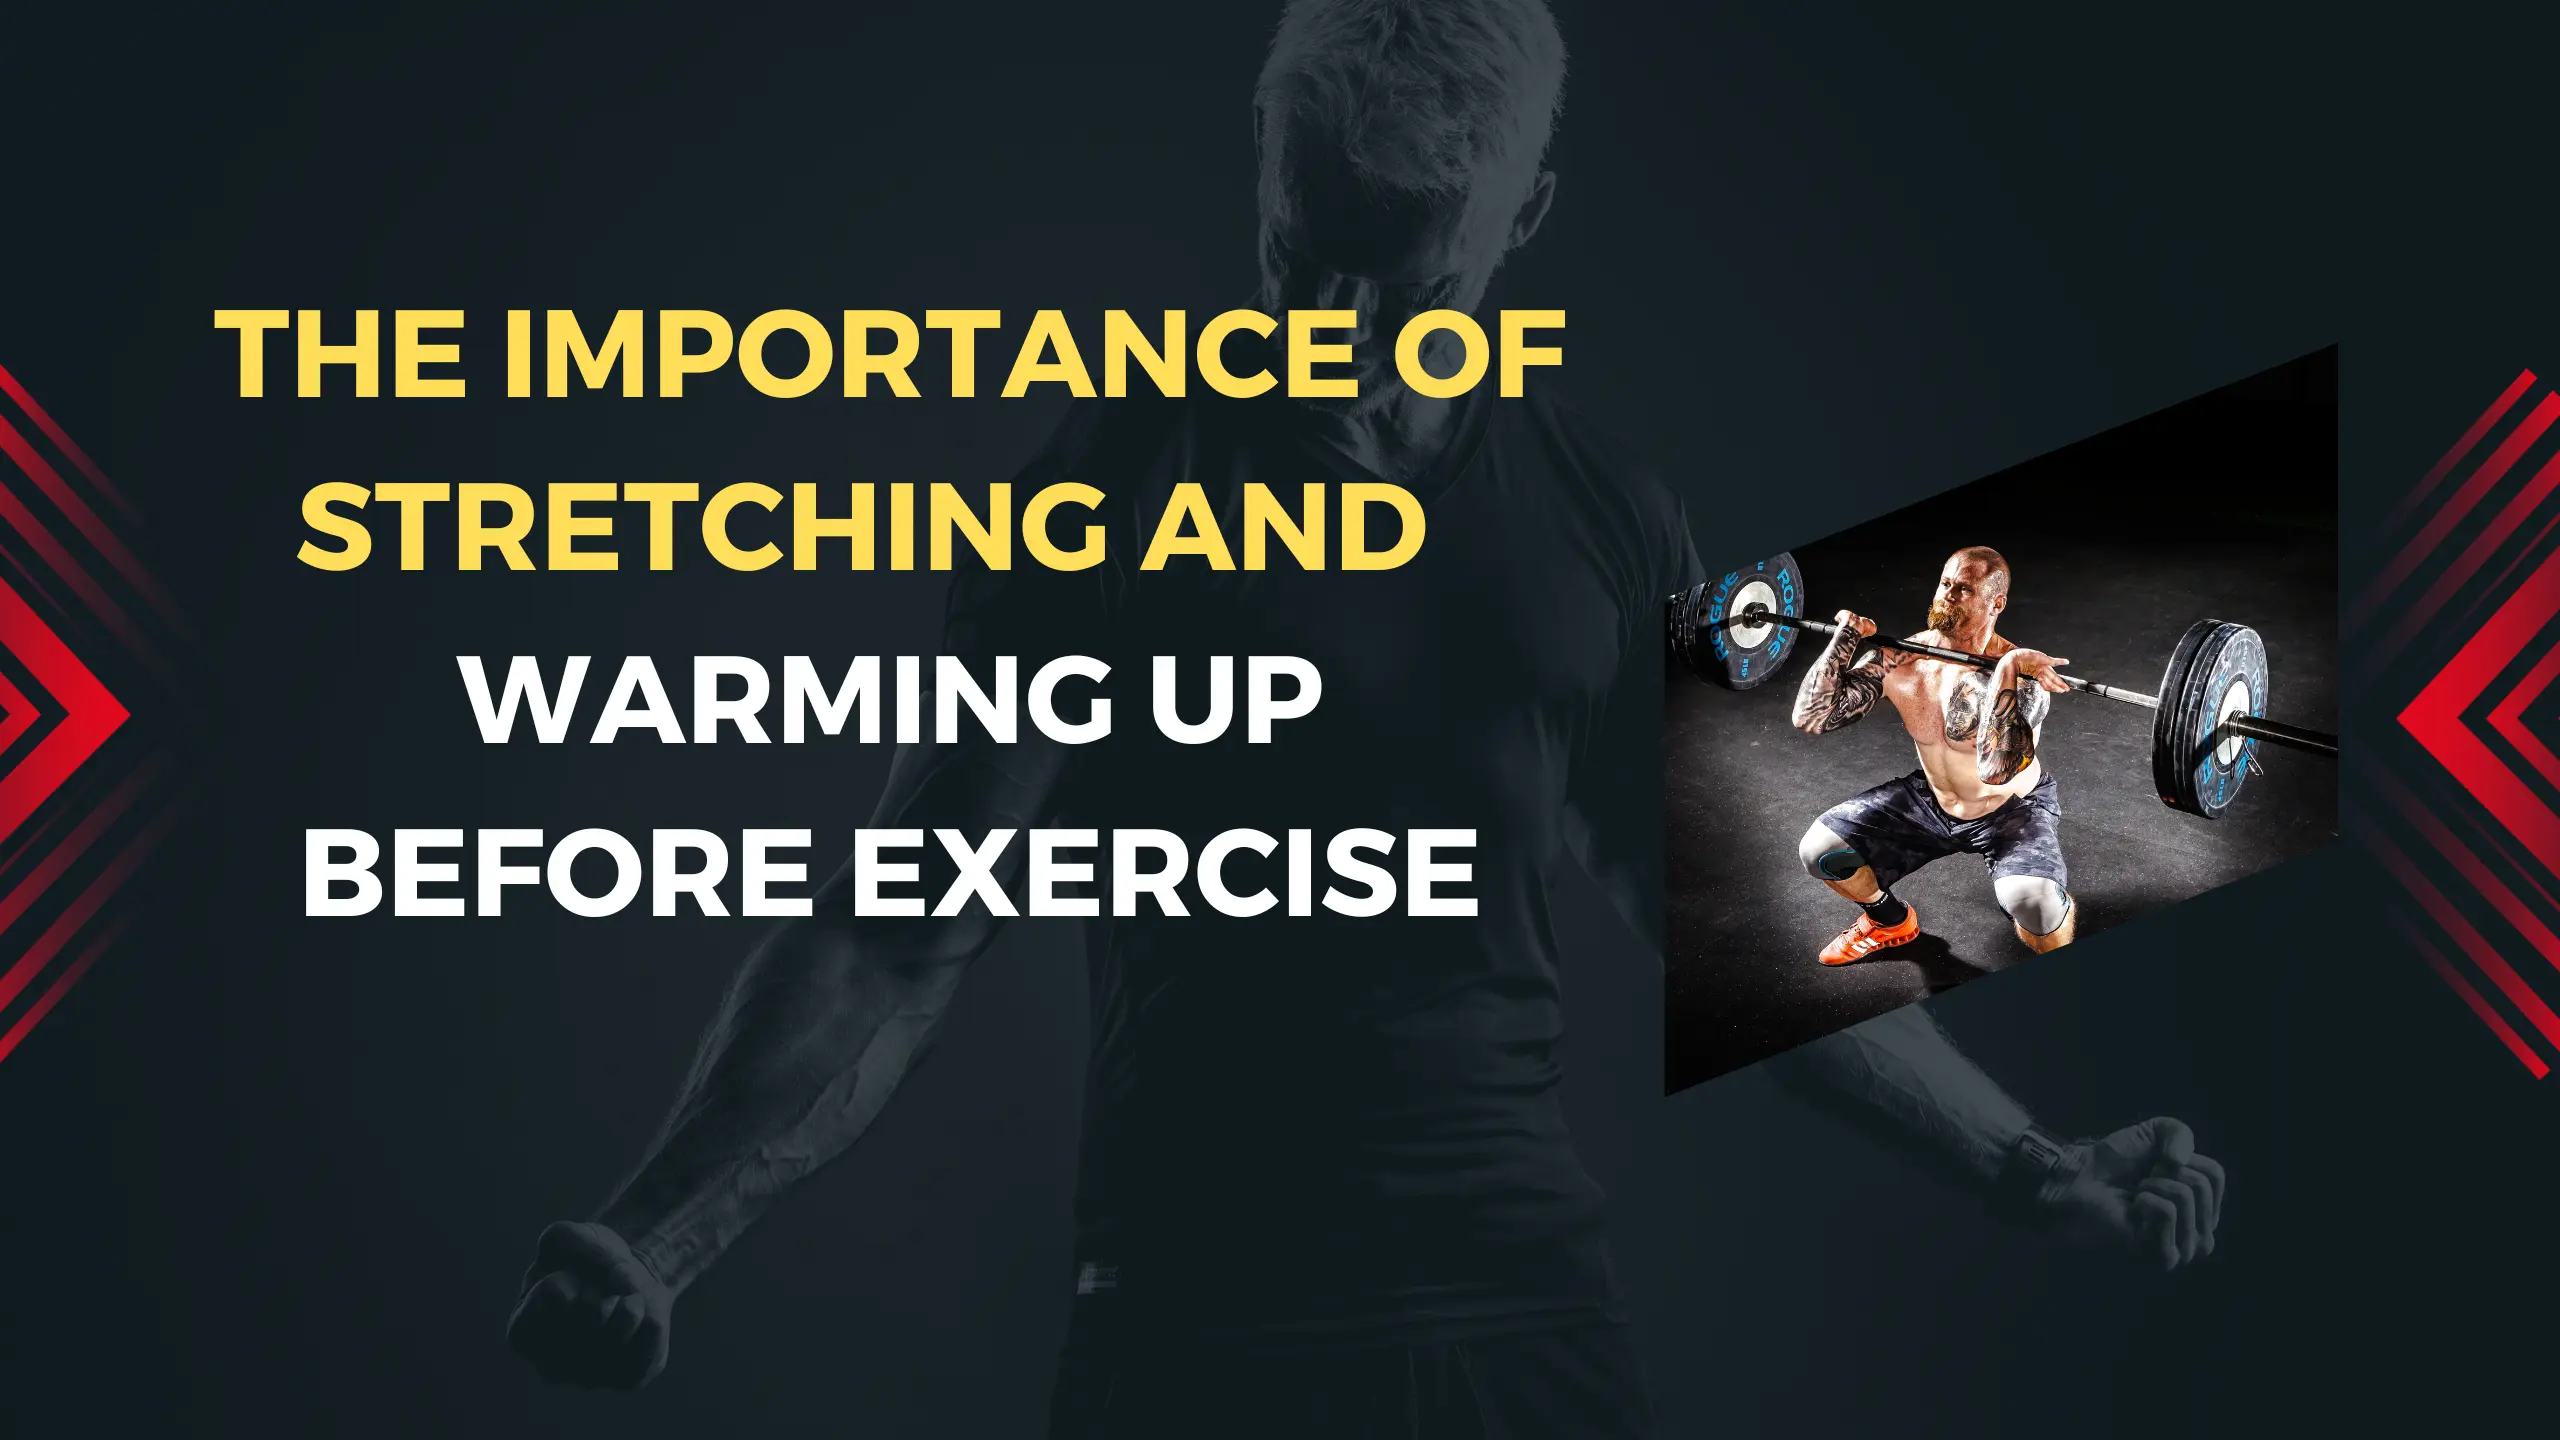 The Importance of stretching and warming up before exercise 